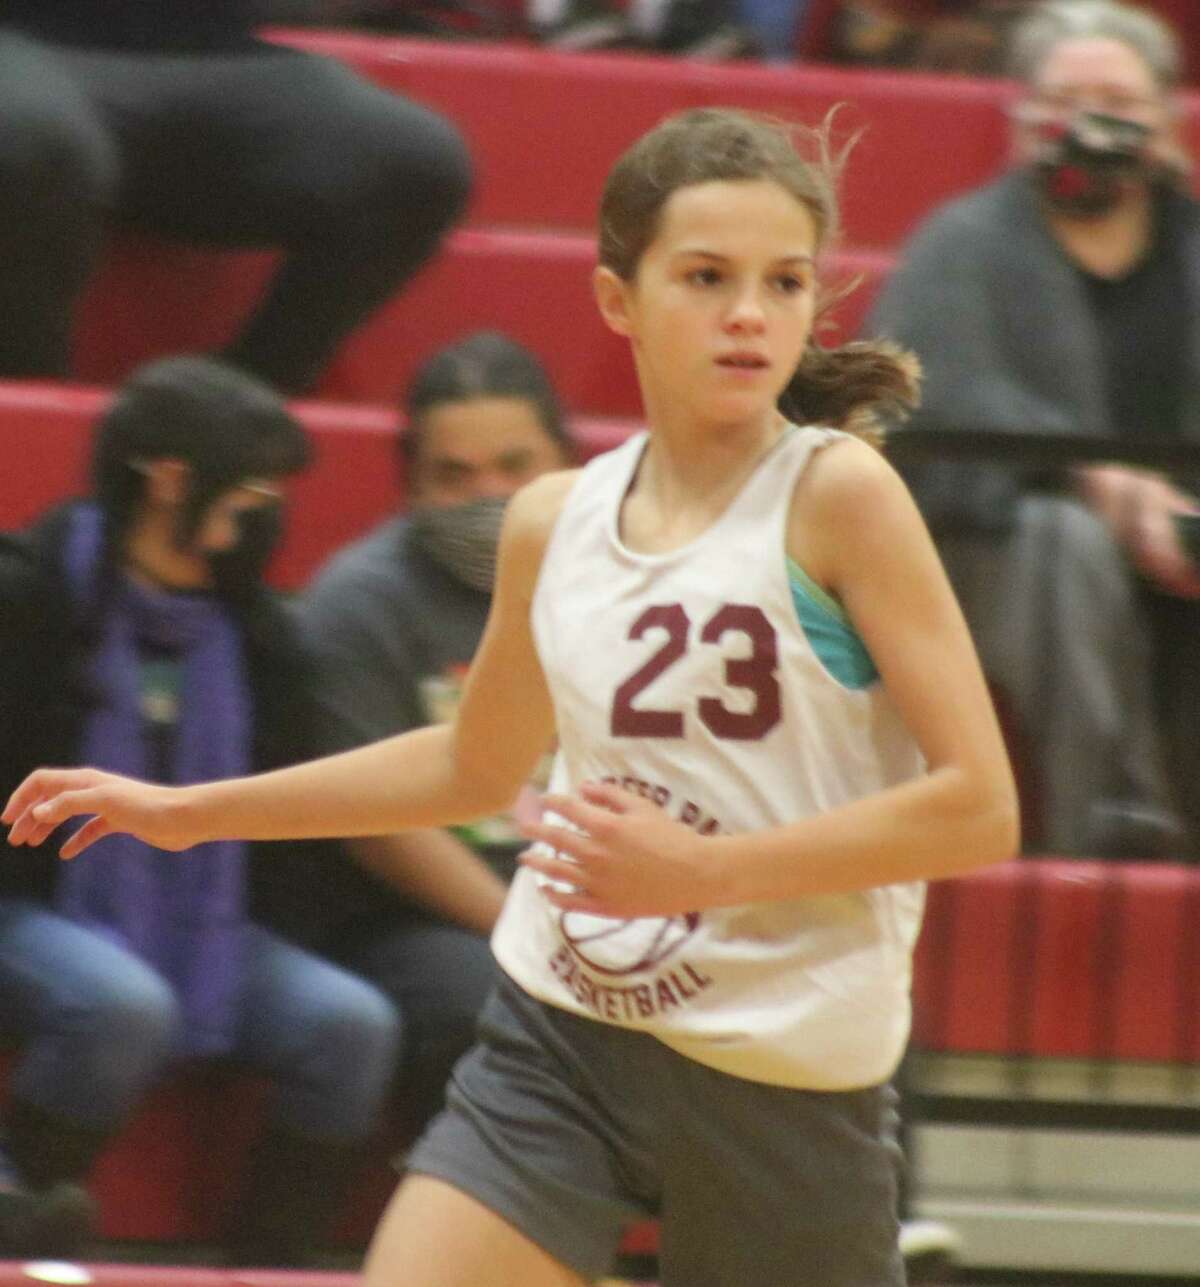 Audrey Beard will have to wait until Feb. 27 before returning to the basketball court now that the Deer Park Parks and Recreation Department has canceled all games for Feb. 20.